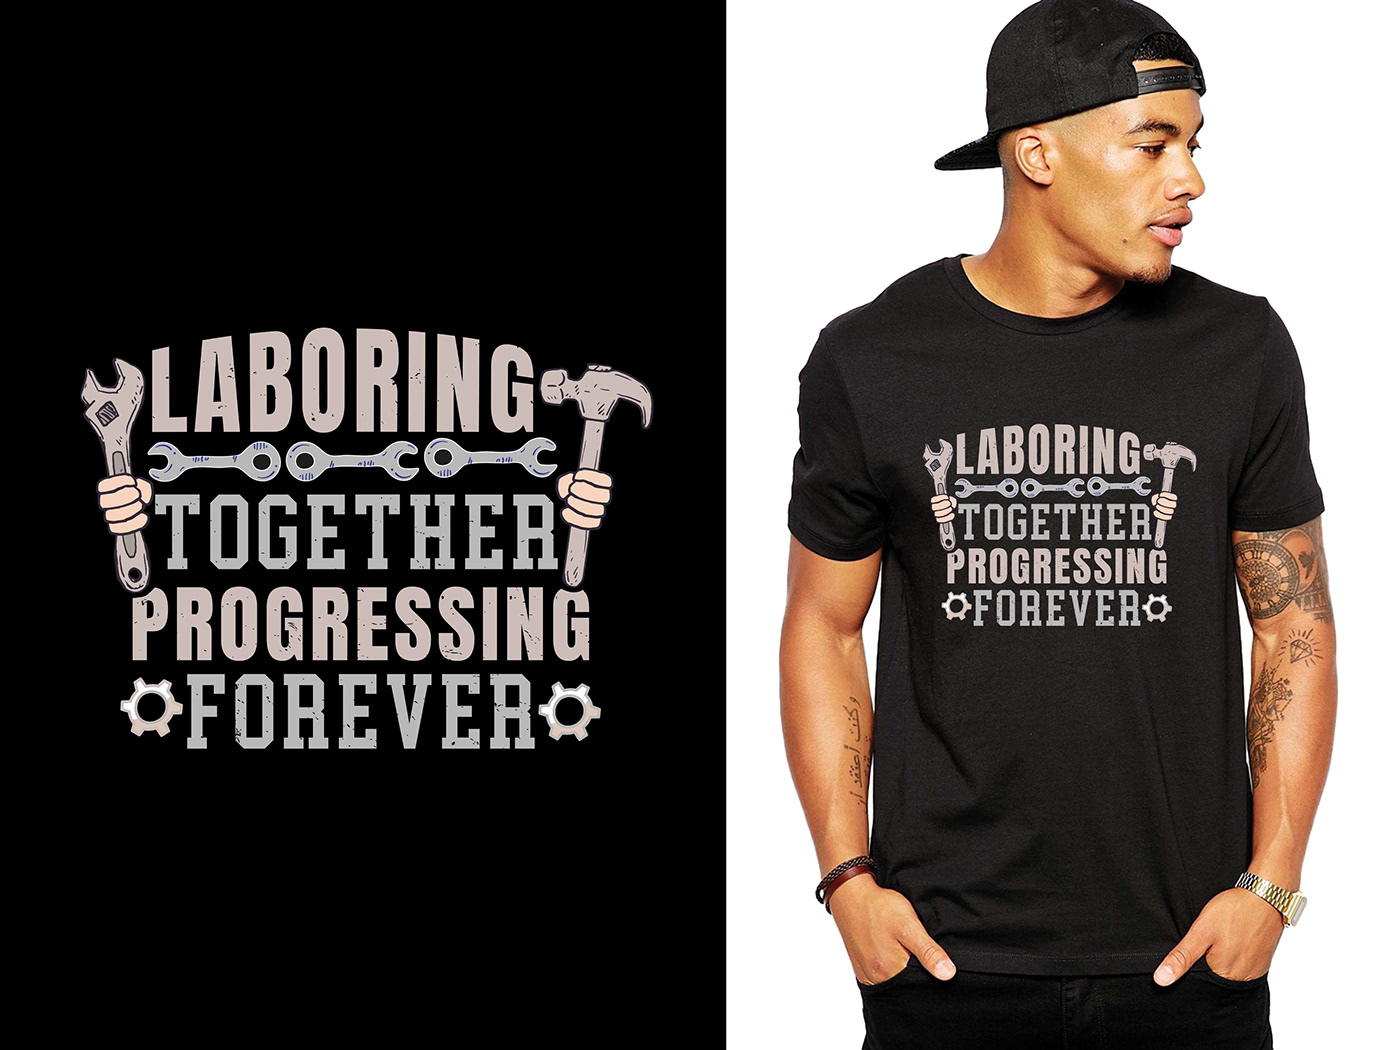 labor day t shirt design may day t shirt design international labor day 1st may workers day custom t-shirt design labor day t shirt May day t shirt Typography t-shirt design Workers Day T-Shirts